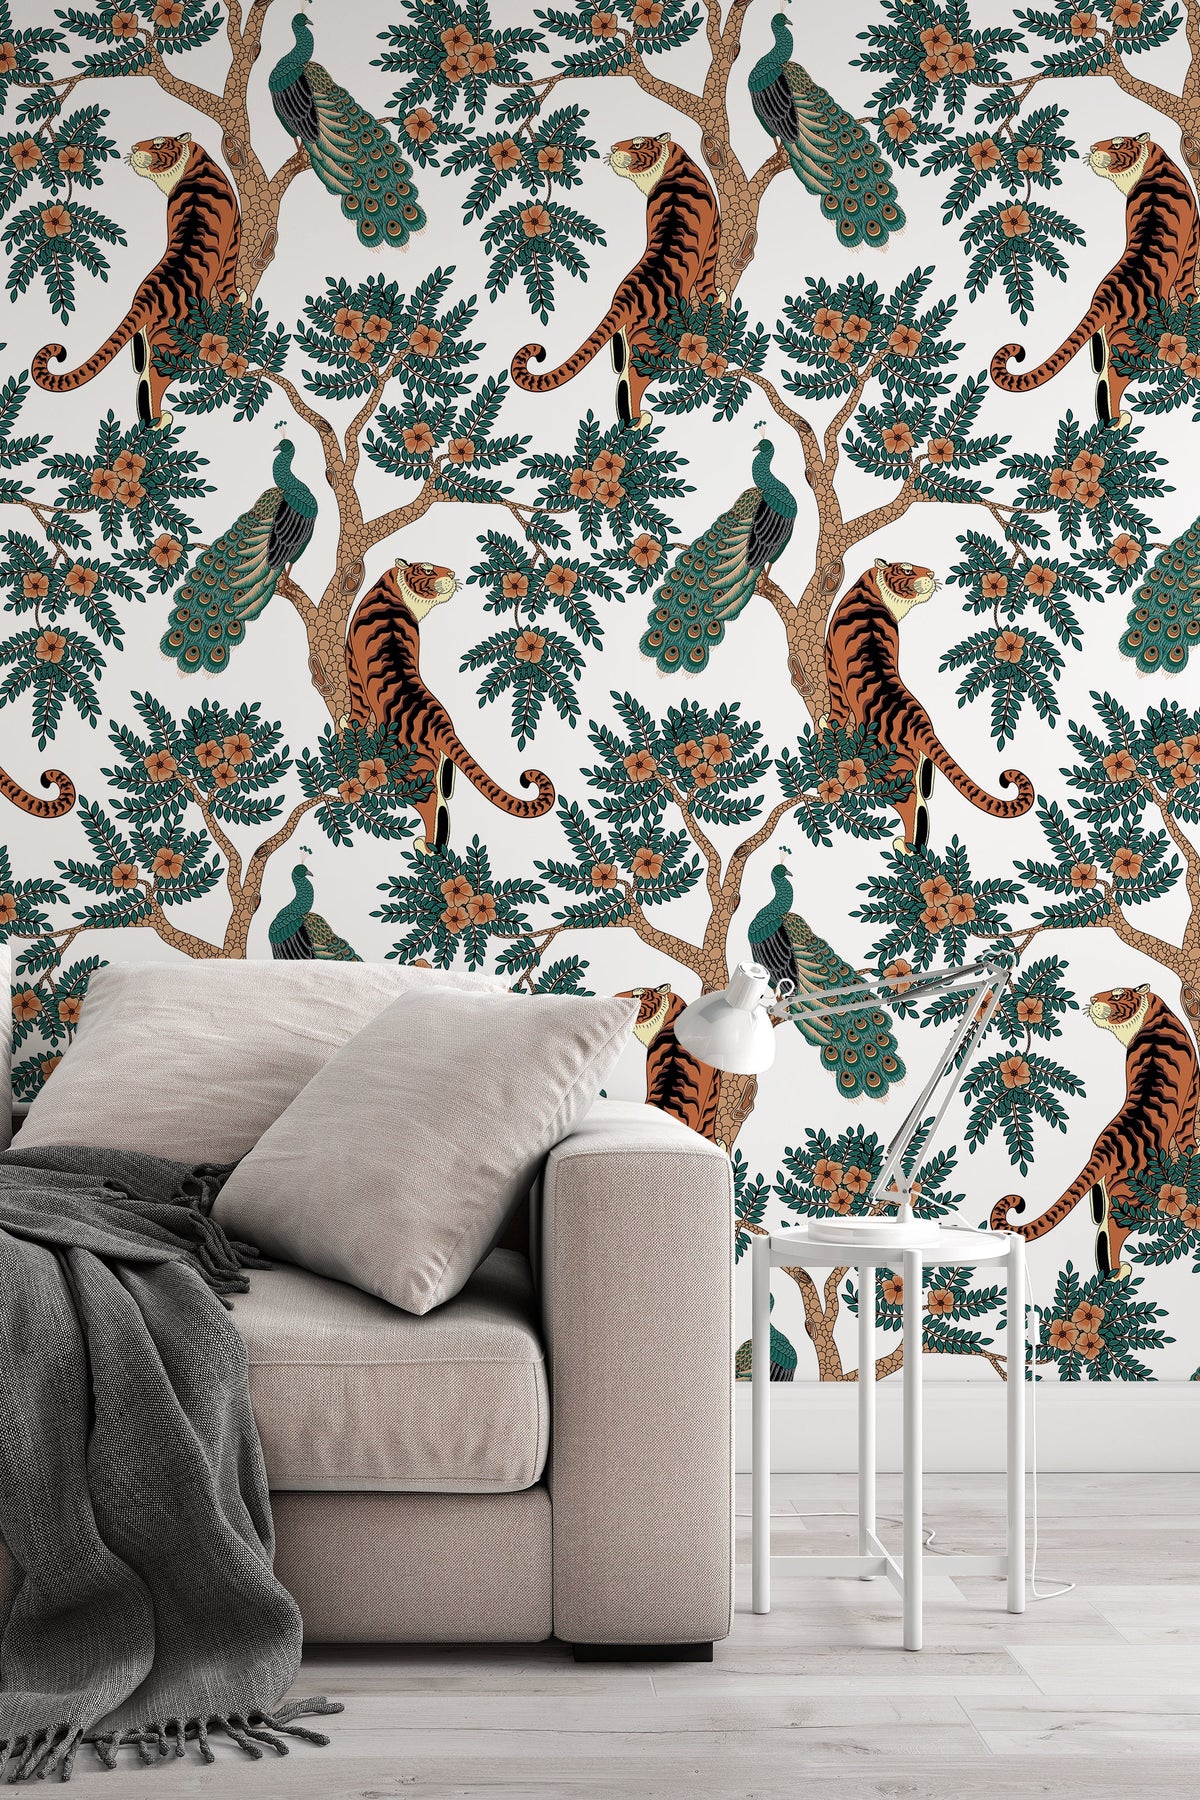 Tiger and Peacock in woods Wallcovering  Peel  Stick Wallpaper  Removable  Self Adhesive Wallpaper Roll pattern wallpaper design3145  California  wallpaper